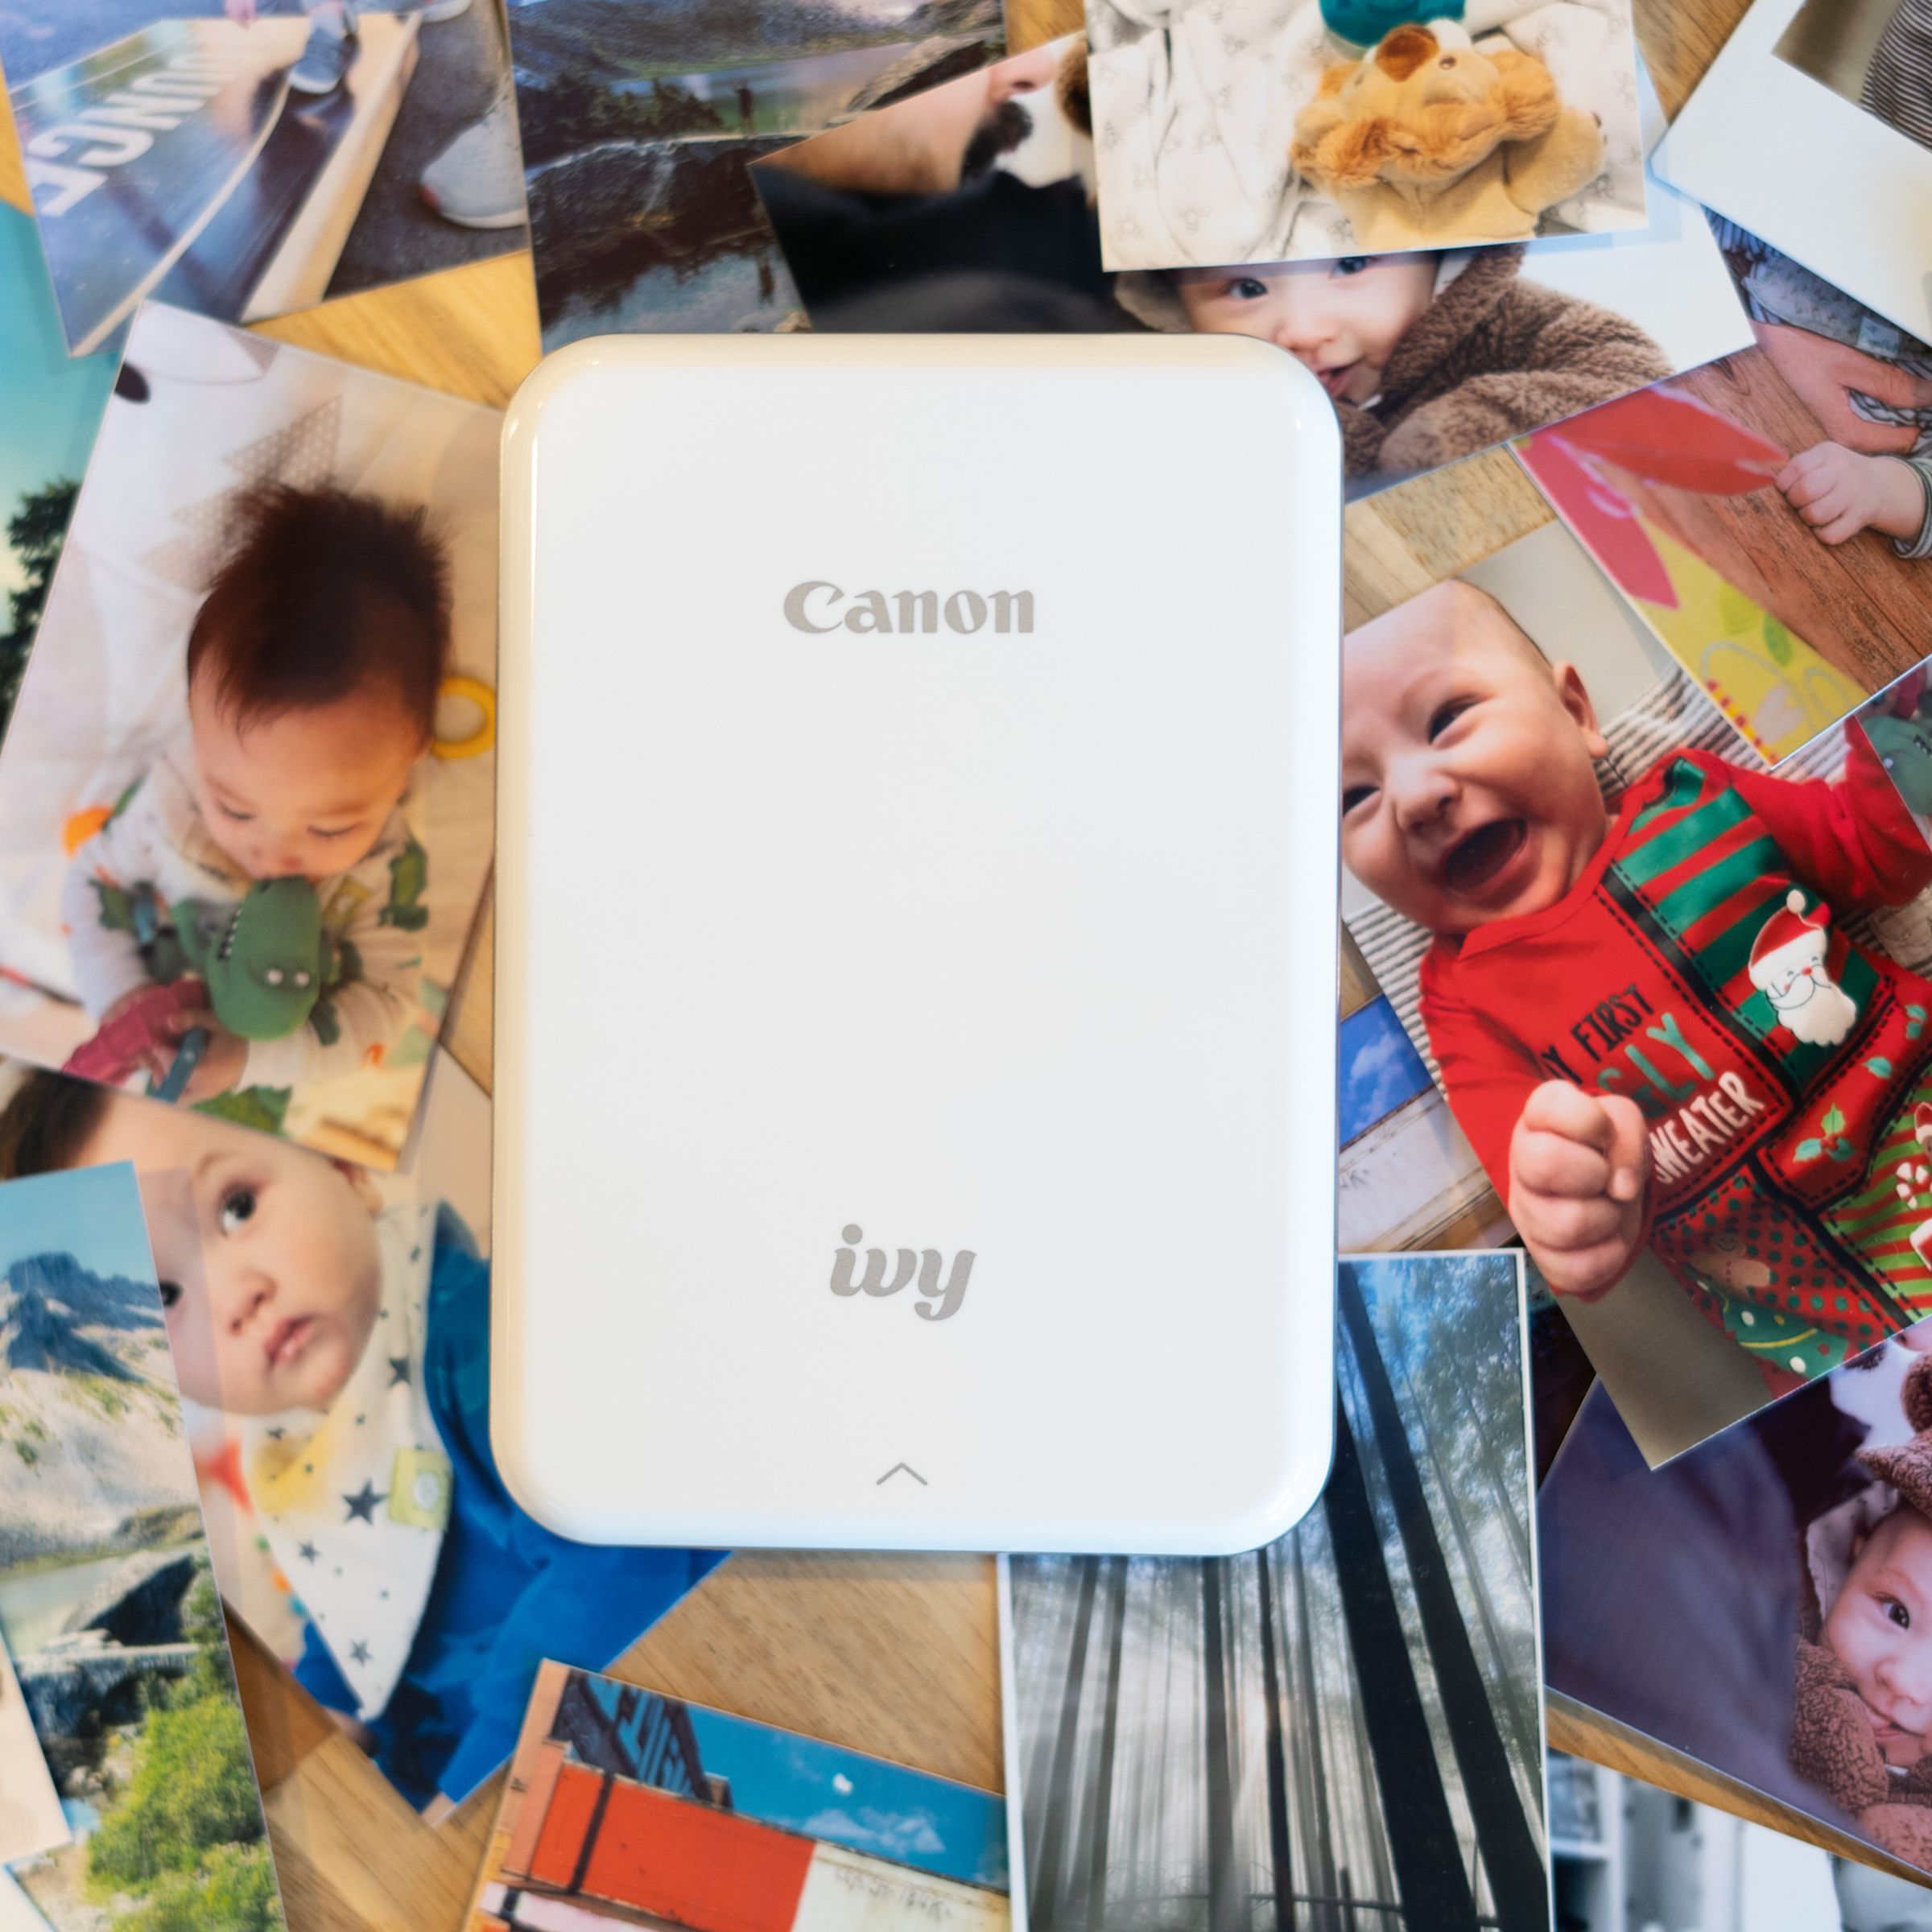 Canon Ivy on a backdrop of instant prints